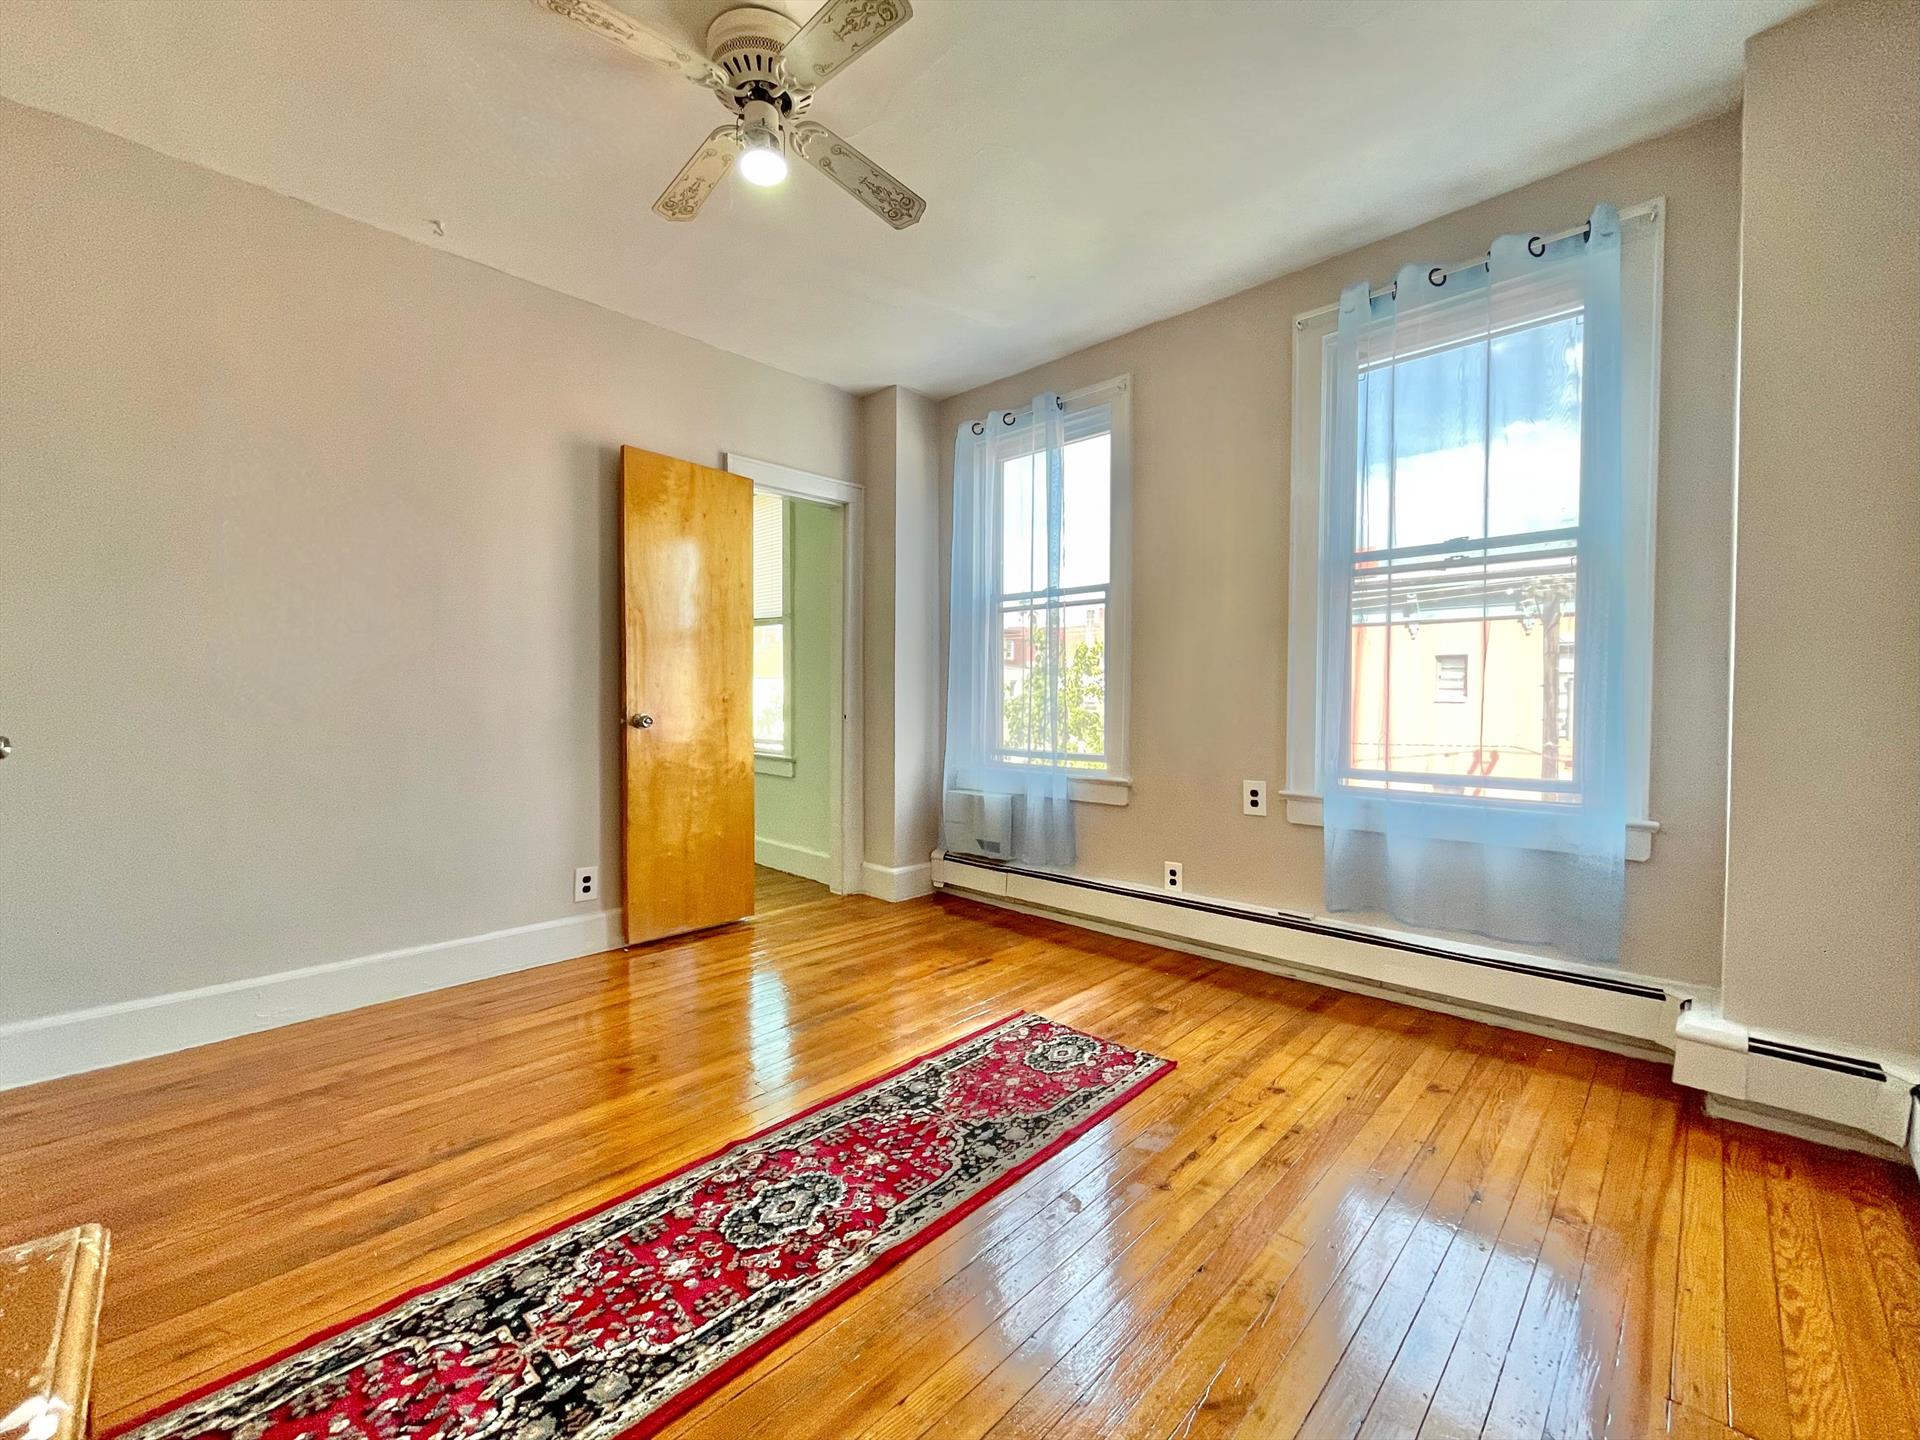 This sun-filled, one bedroom apartment in a great Downtown Jersey City location features a walk-in closet or office space, ceiling fans, and hardwood floors throughout. Close to popular restaurants, World Boxing Gym,  Jersey City Library, Enos Jones Park, and Hamilton Park. Available September 1st!